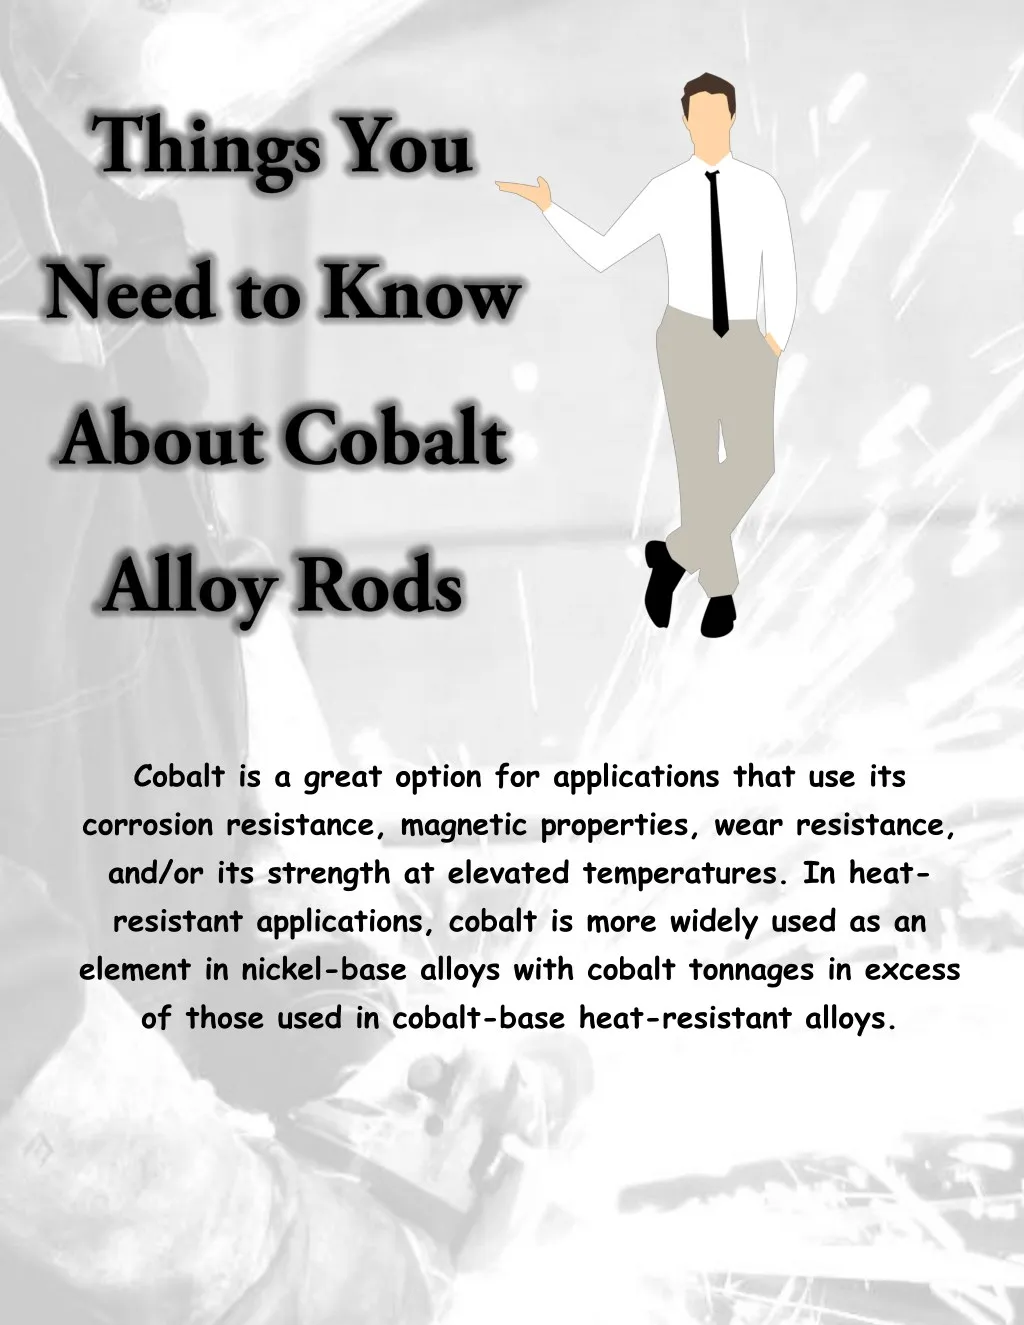 cobalt is a great option for applications that